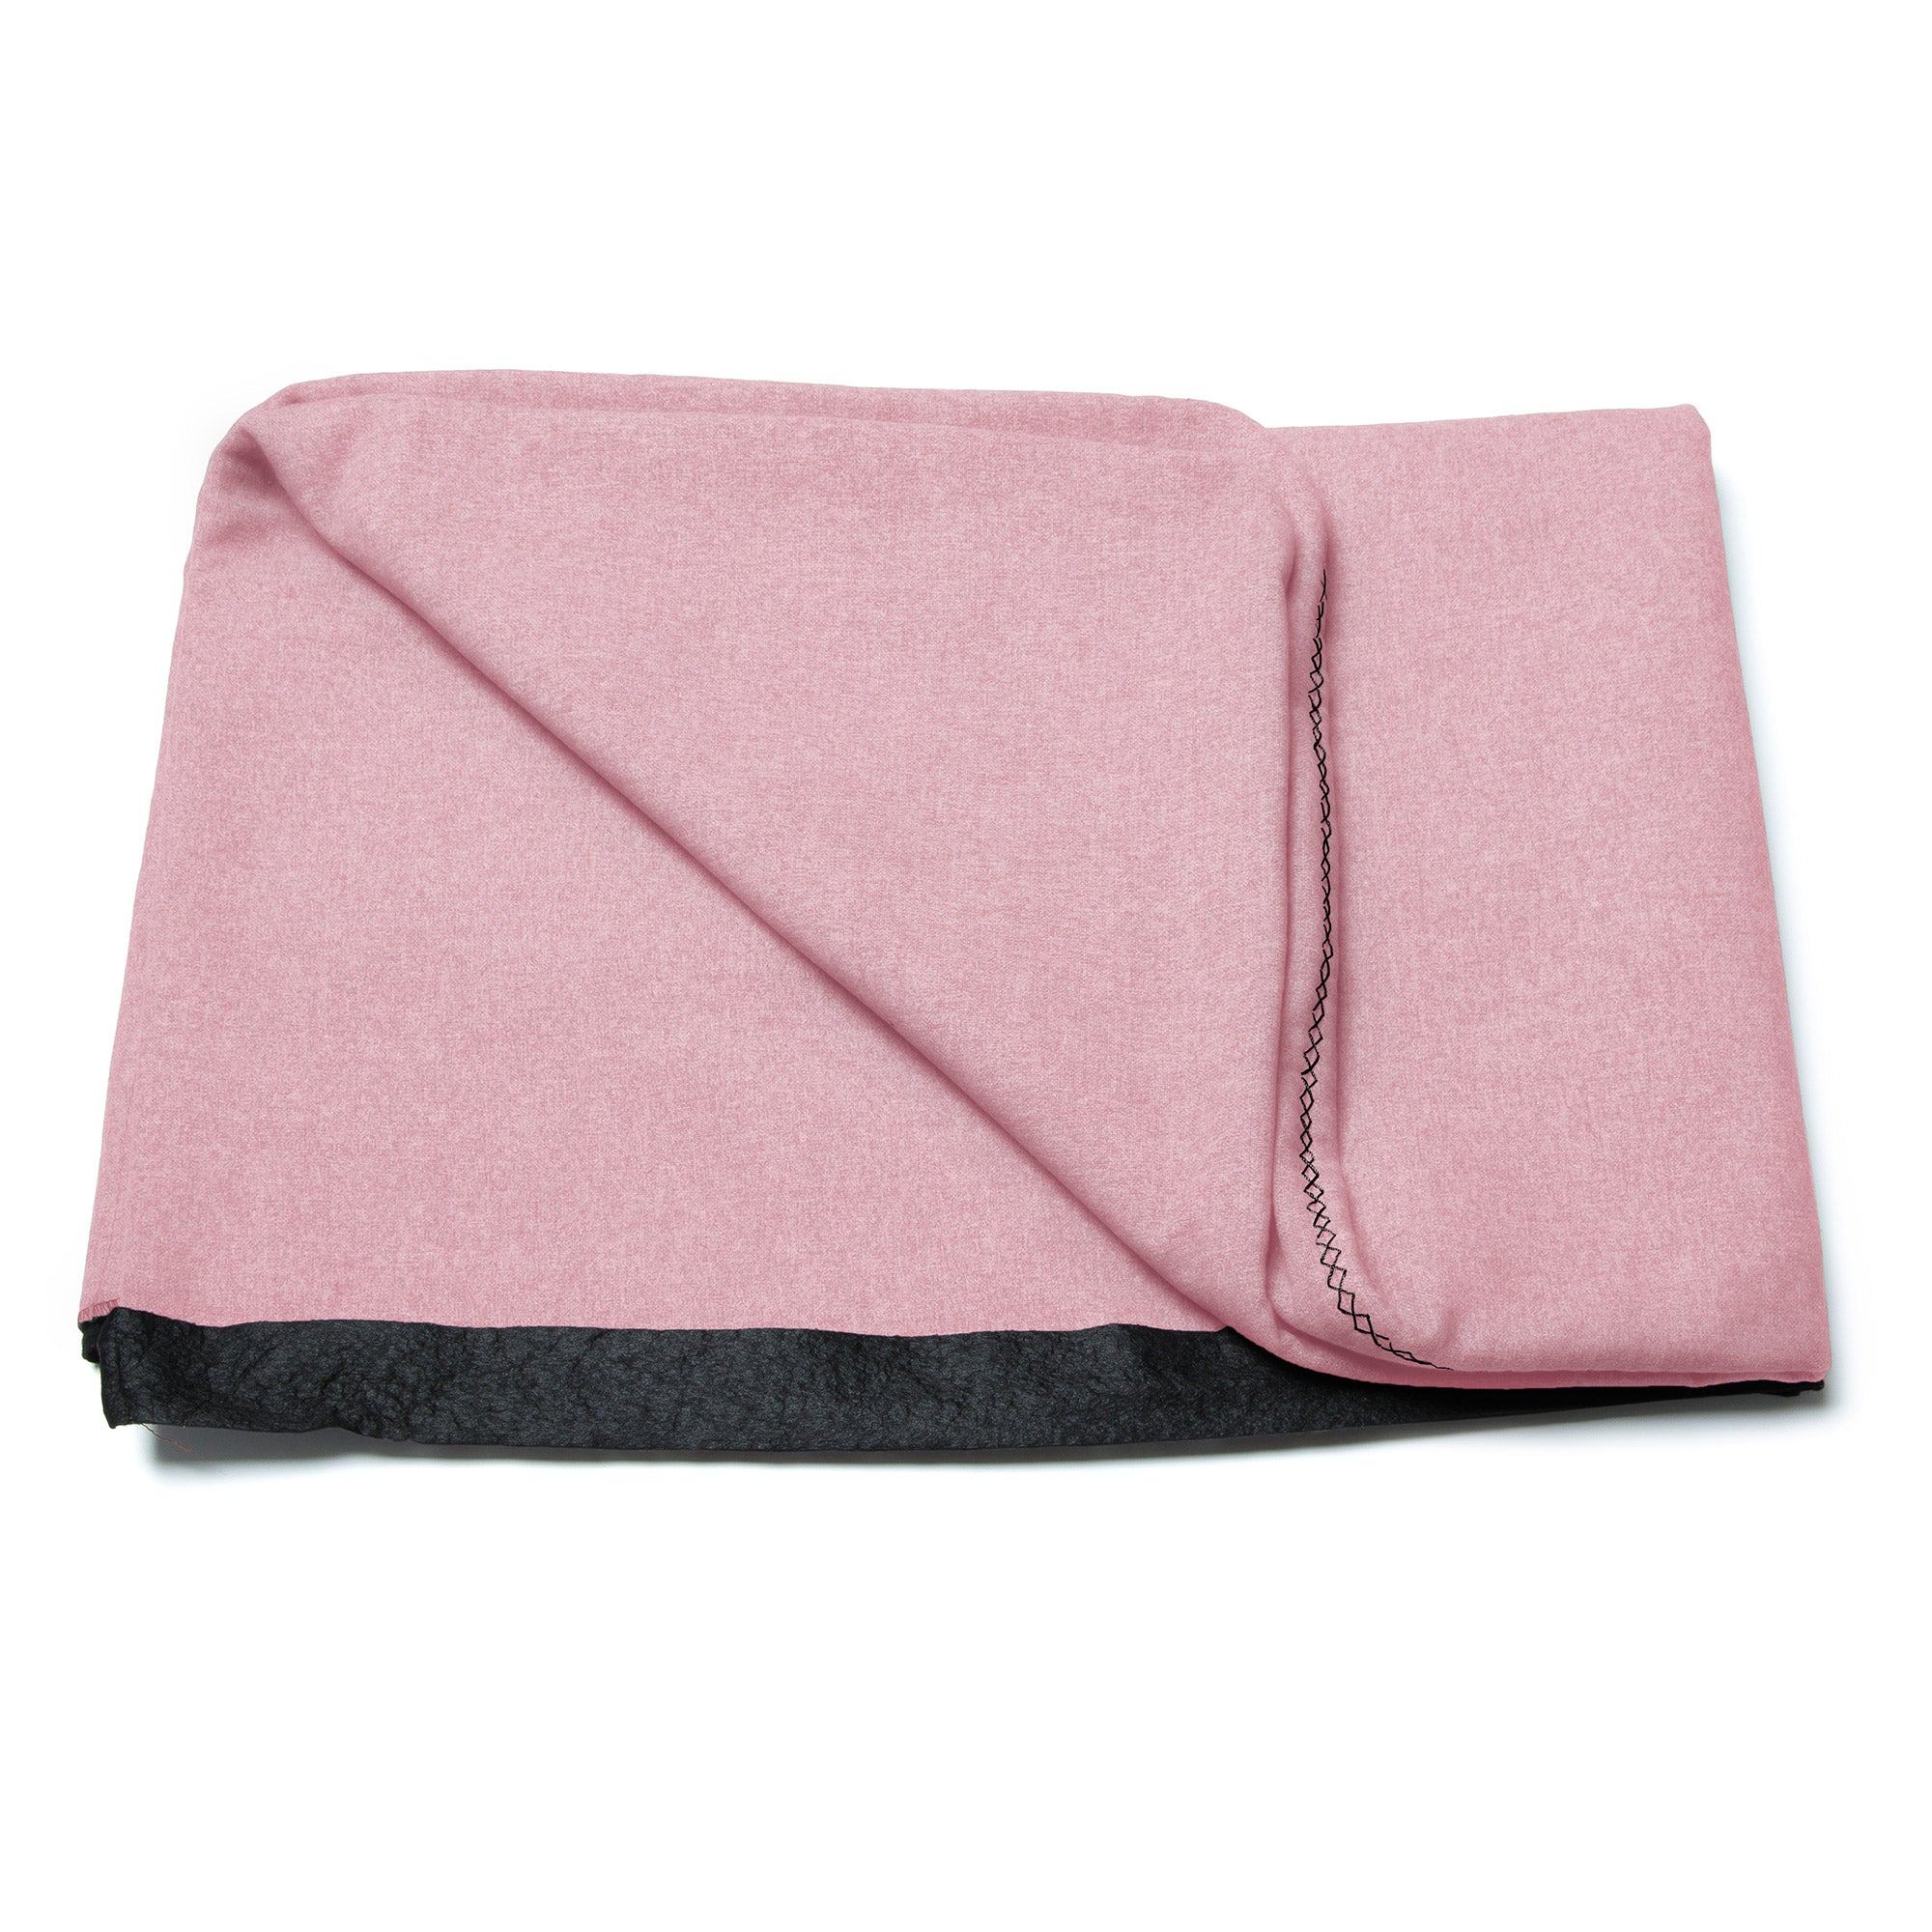 Dyla headboard cover in pink for 90 cm beds